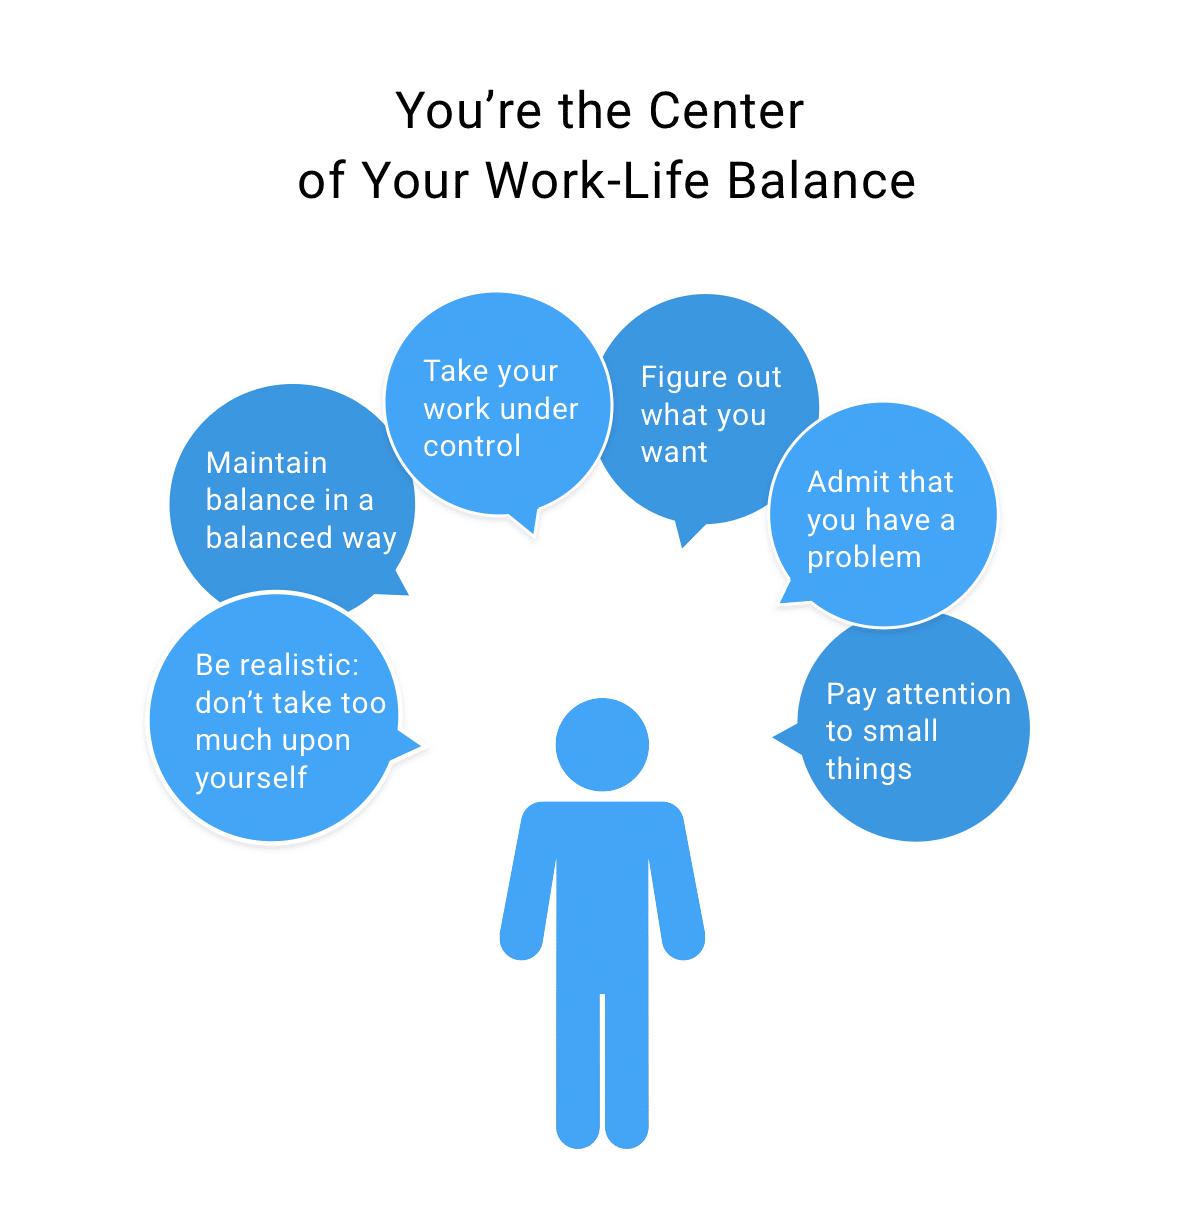 How Can Online Personal Trainers Help in Improving Work-life Balance?